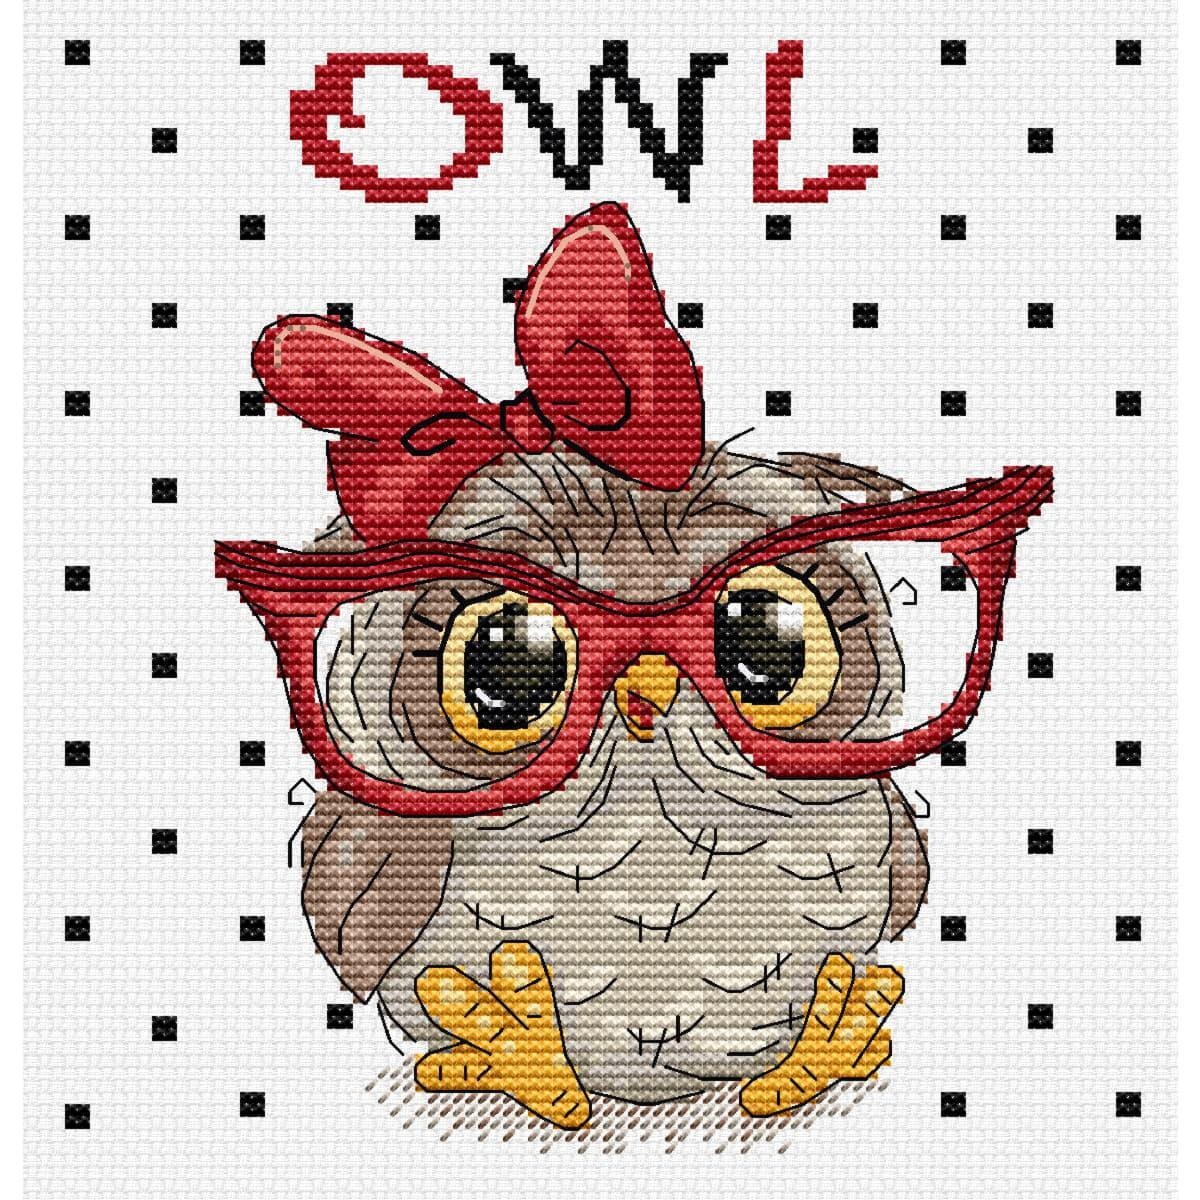 A cute cartoon-style owl with large, expressive eyes...